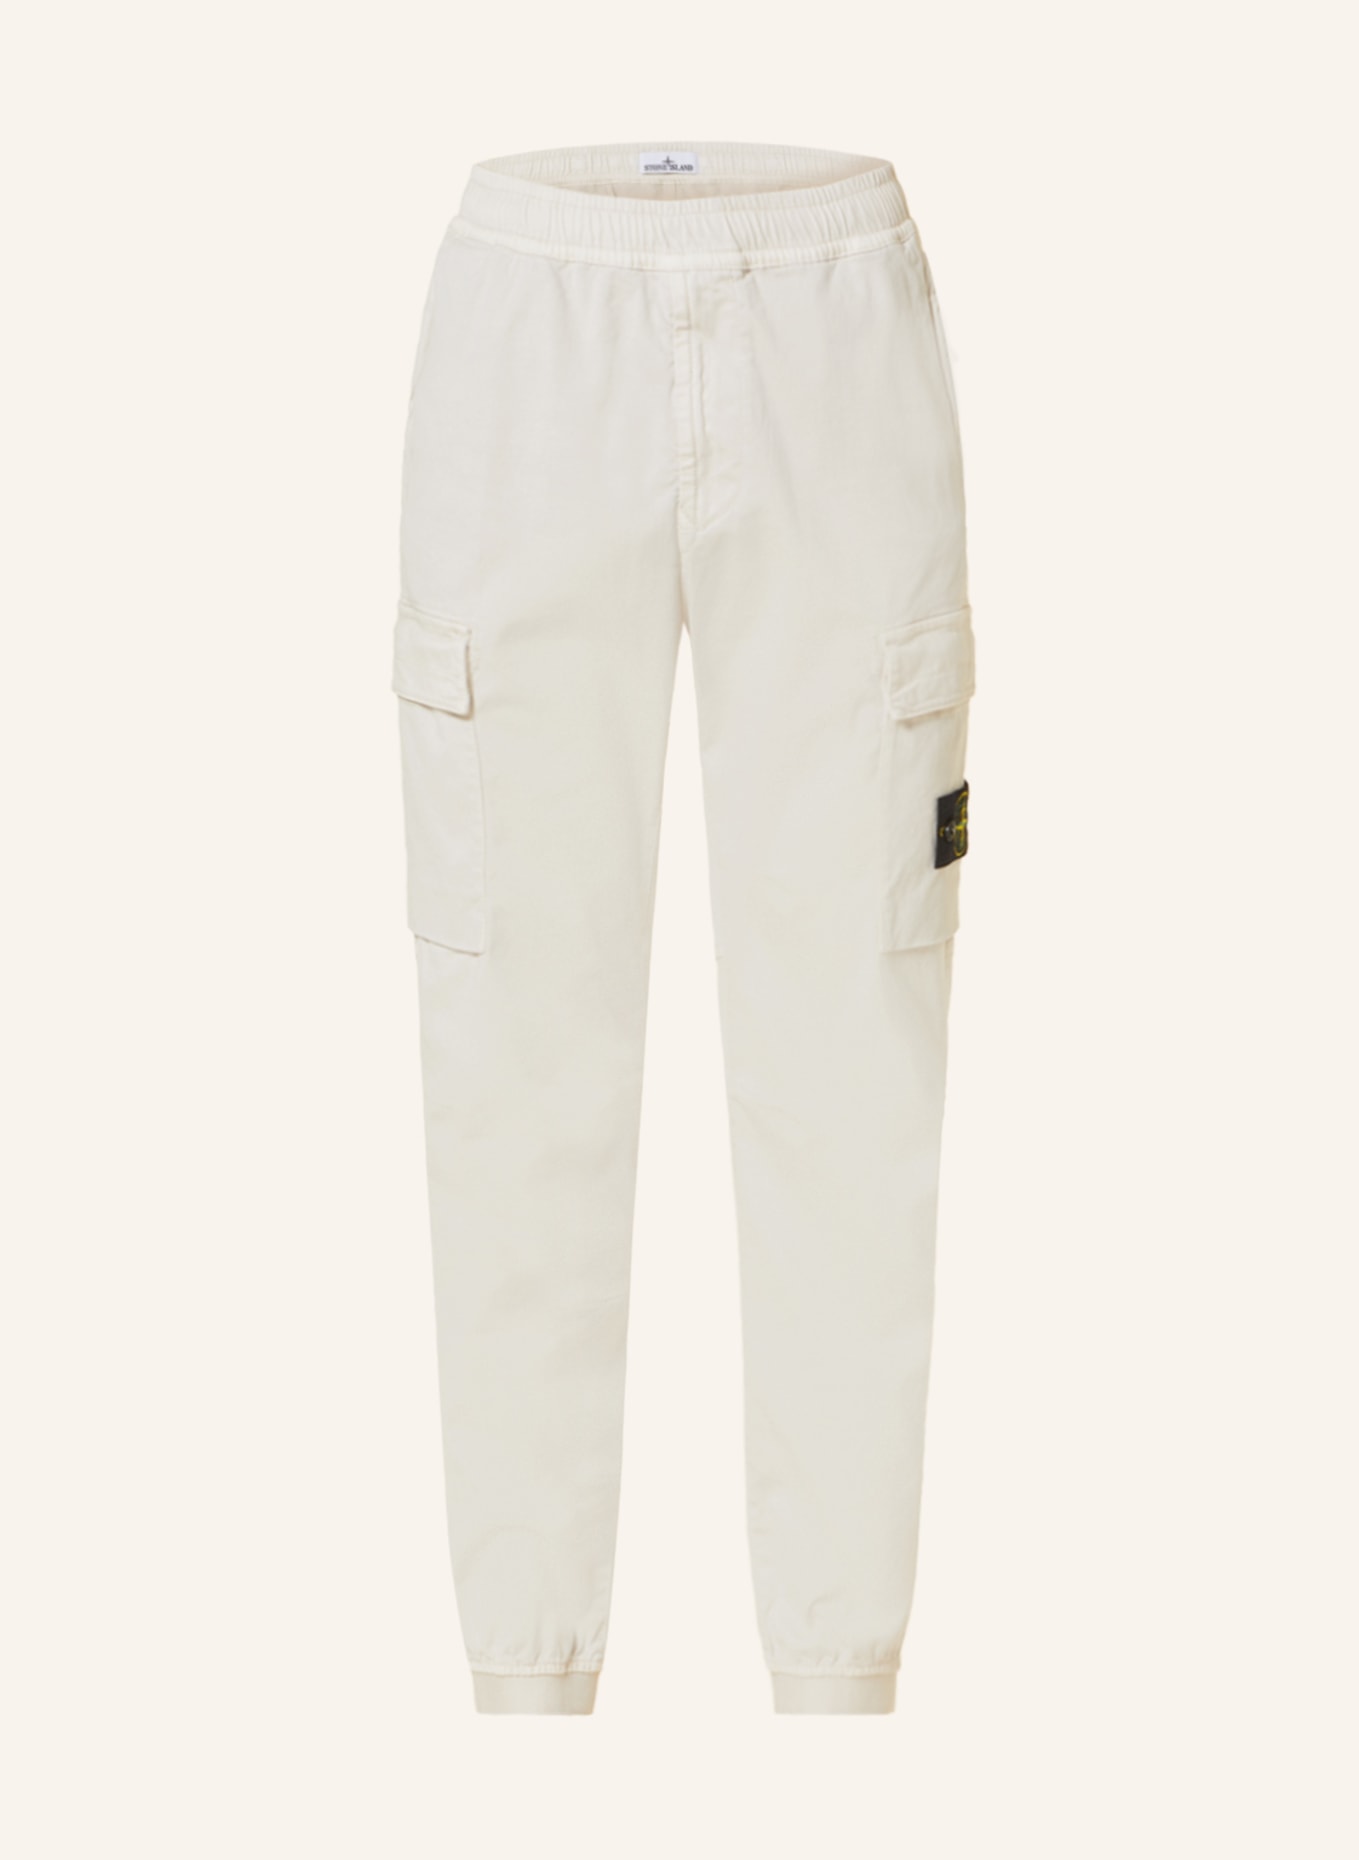 New Look straight chino pants in stone | ASOS